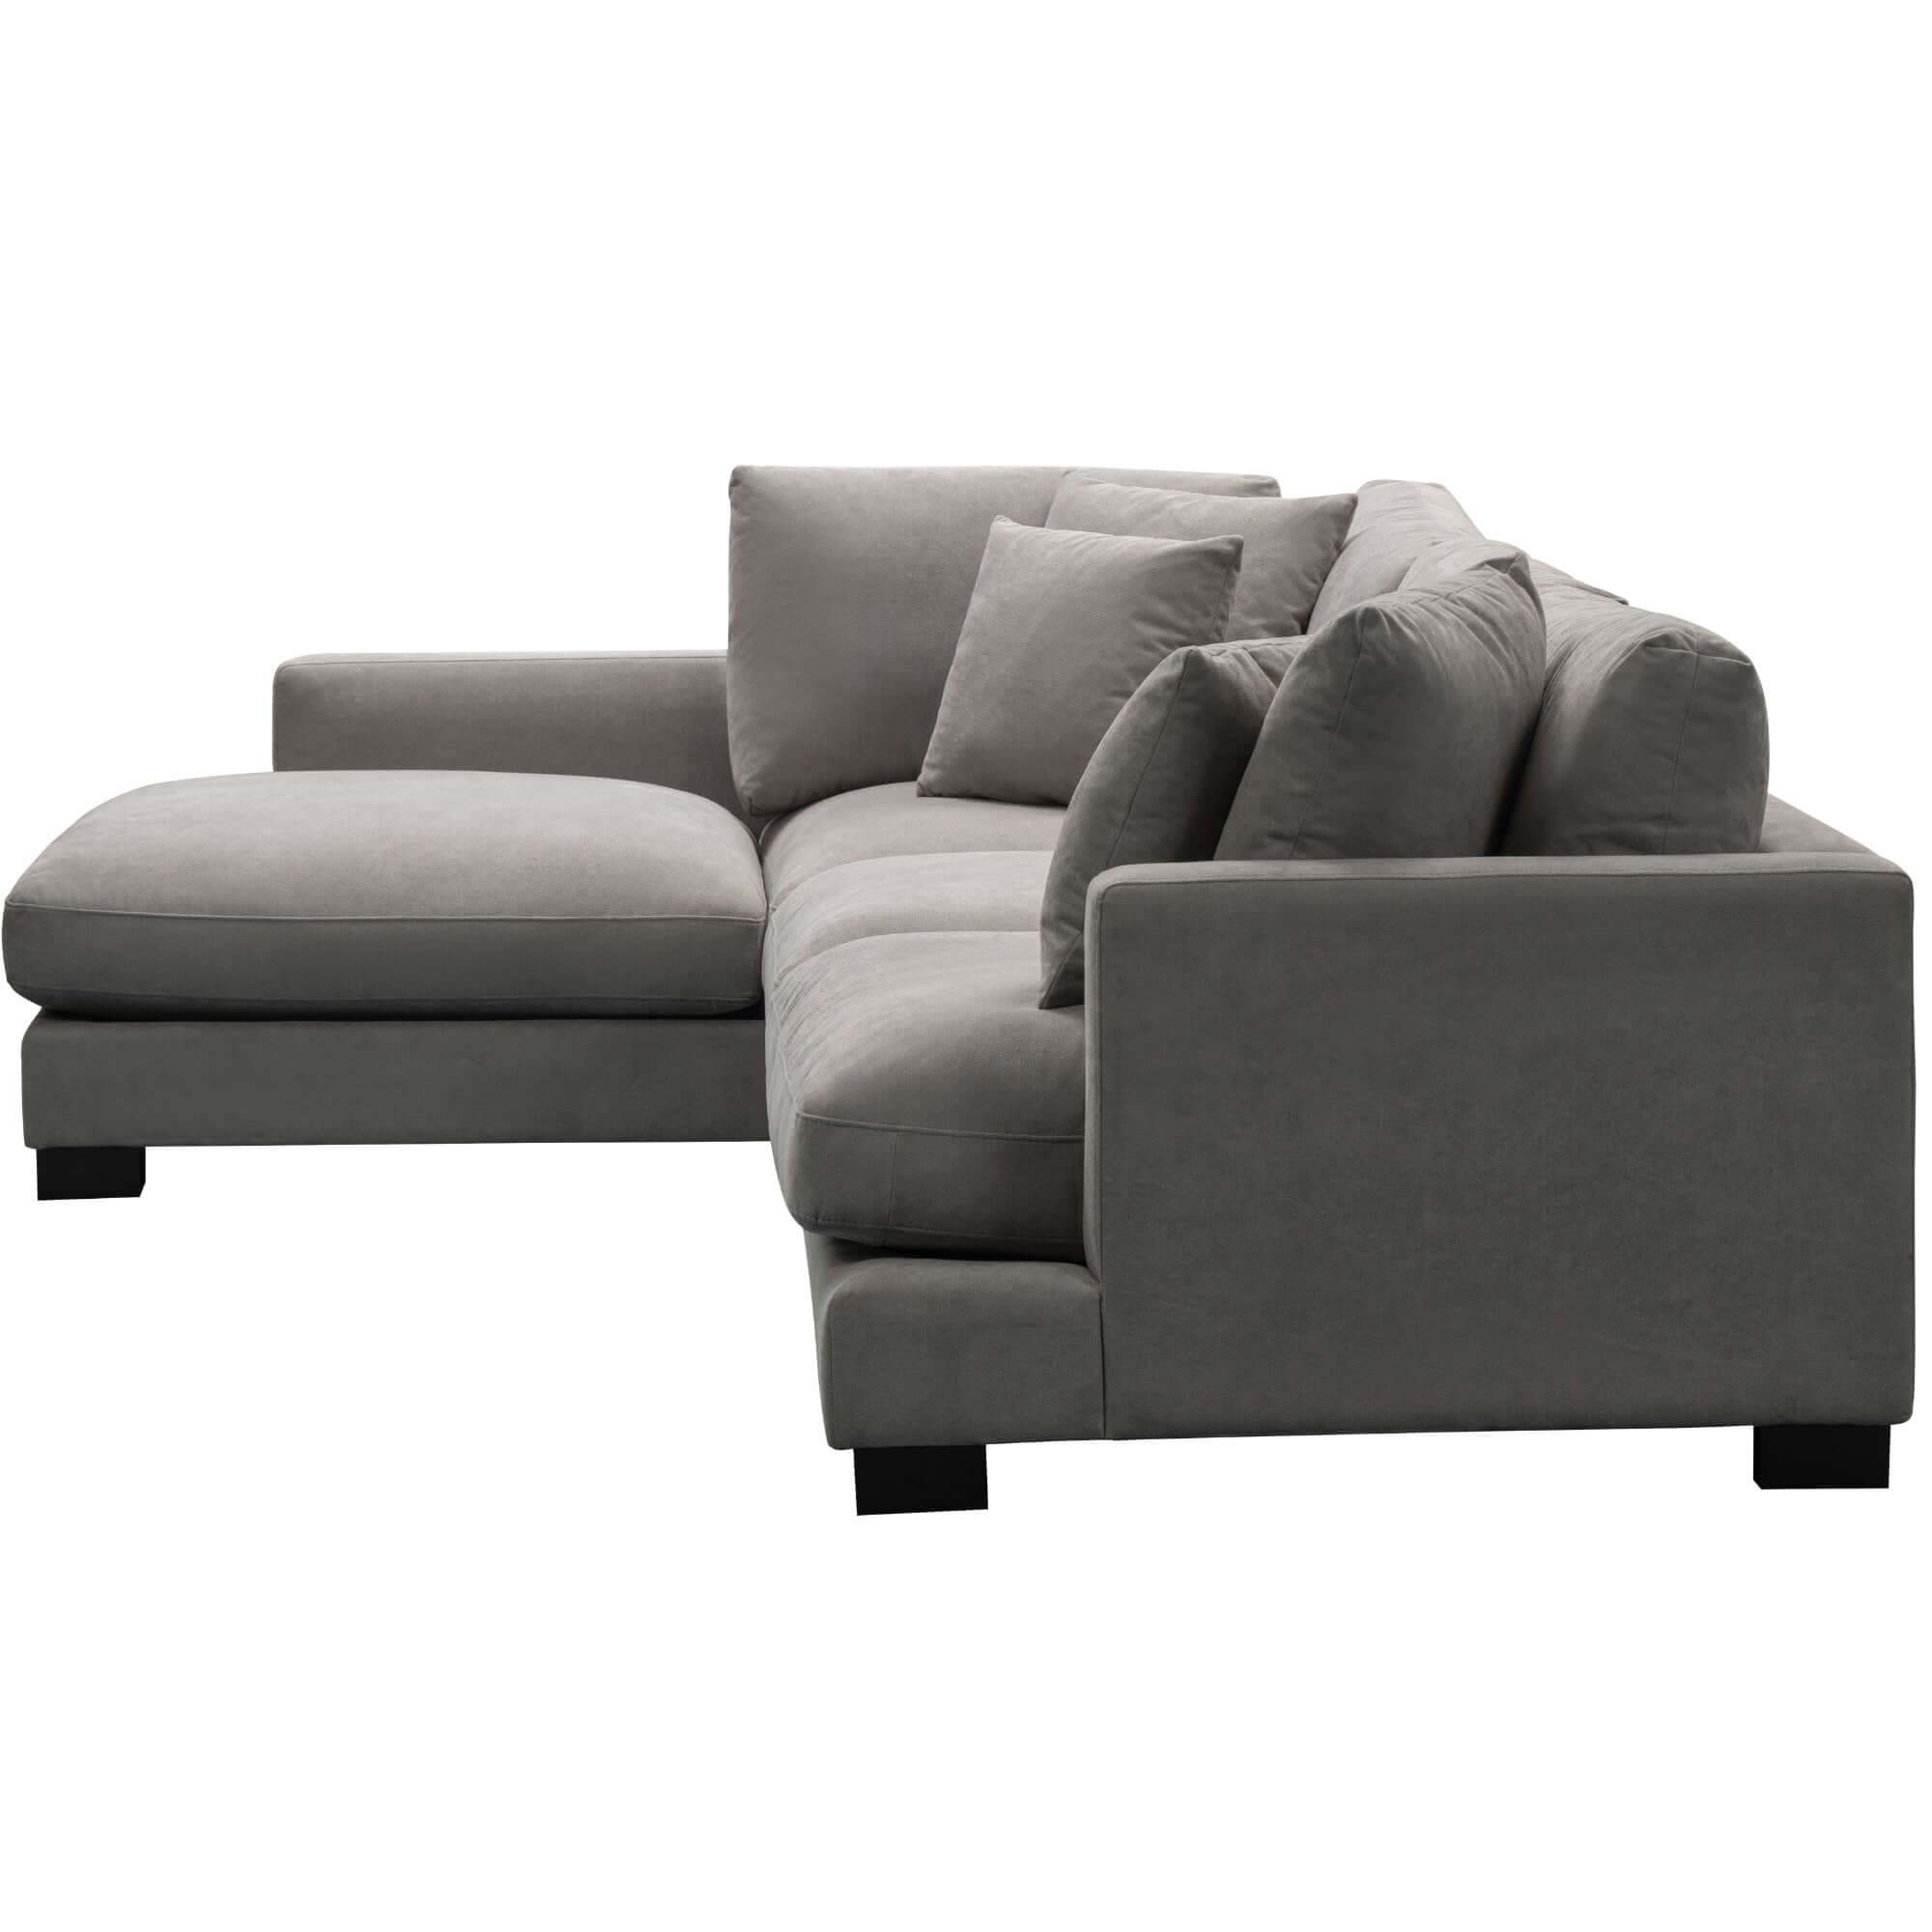 Royalty 3-Seater Left Chaise Lounge - Grey Fabric-Upinteriors